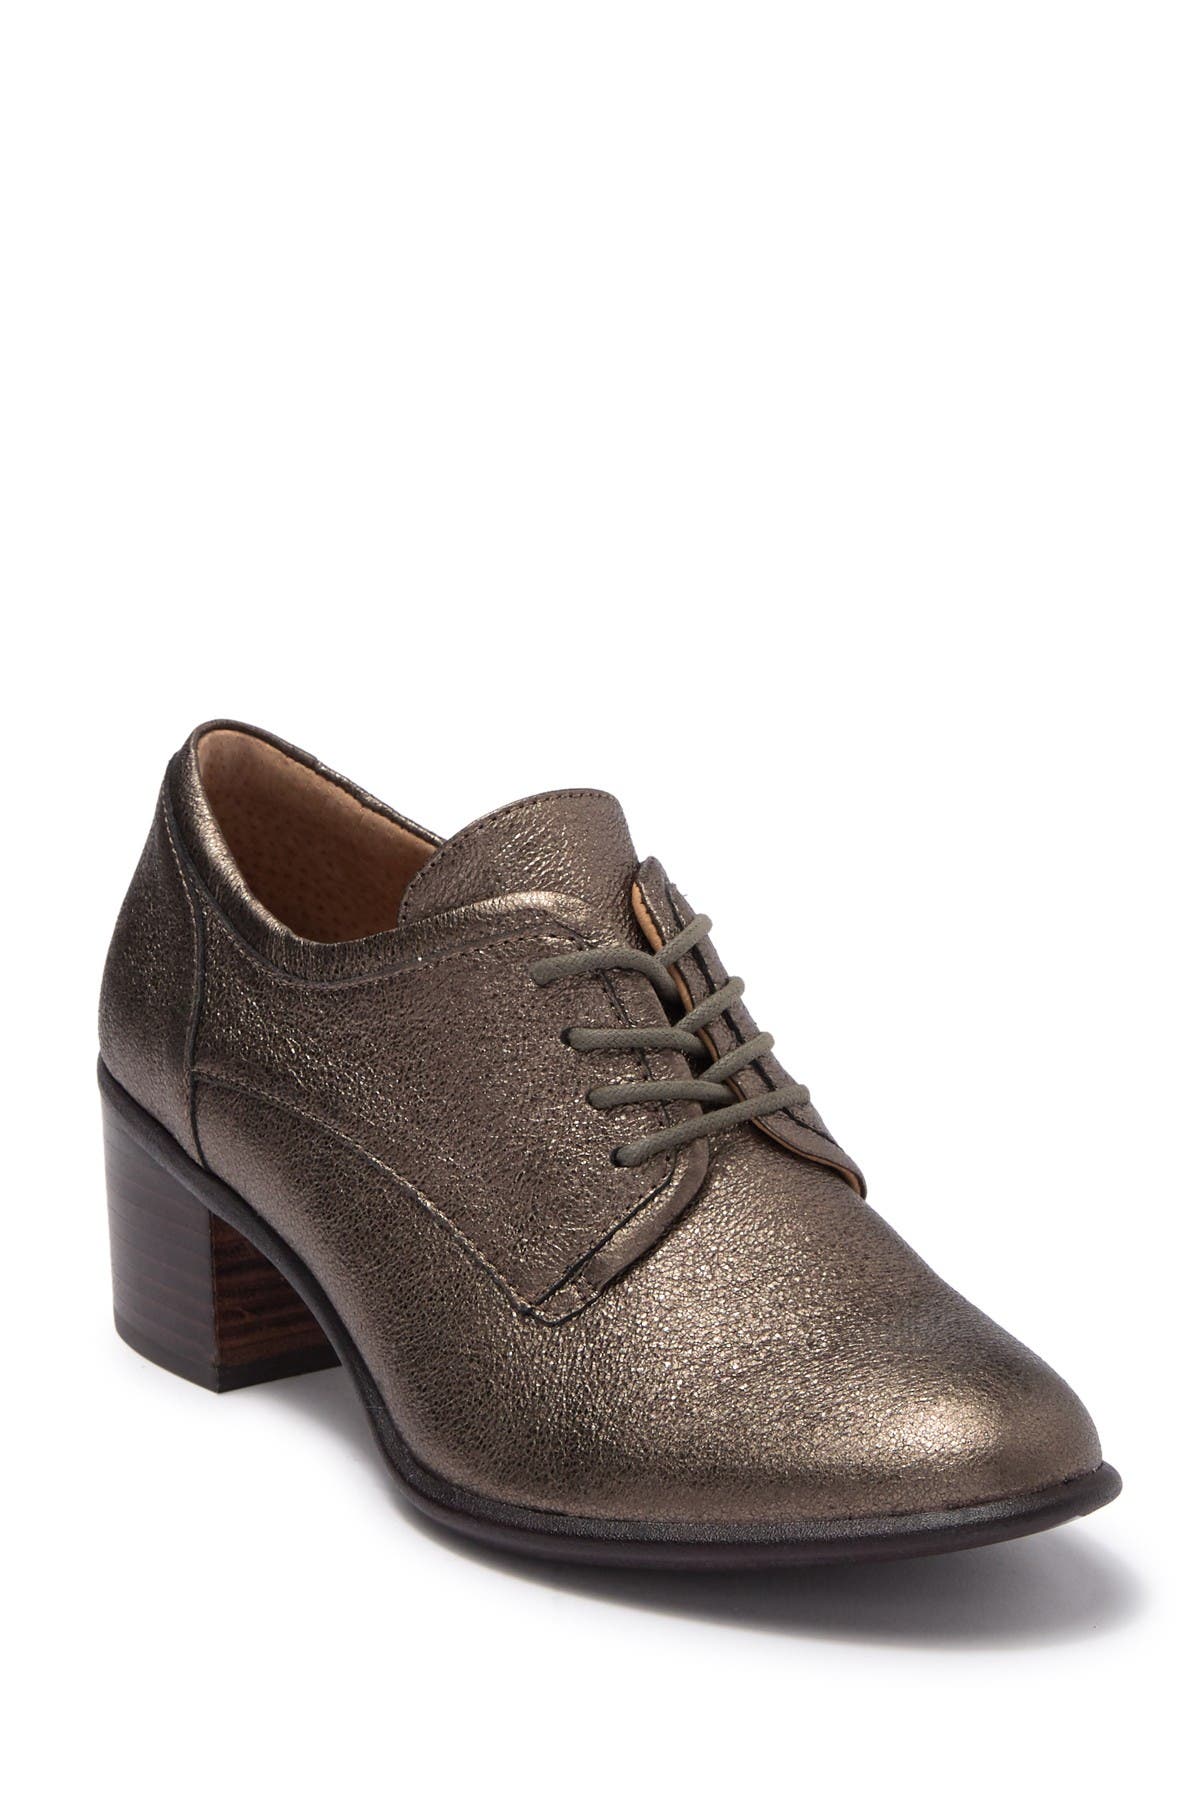 Patience Metallic Leather Oxford Bootie 